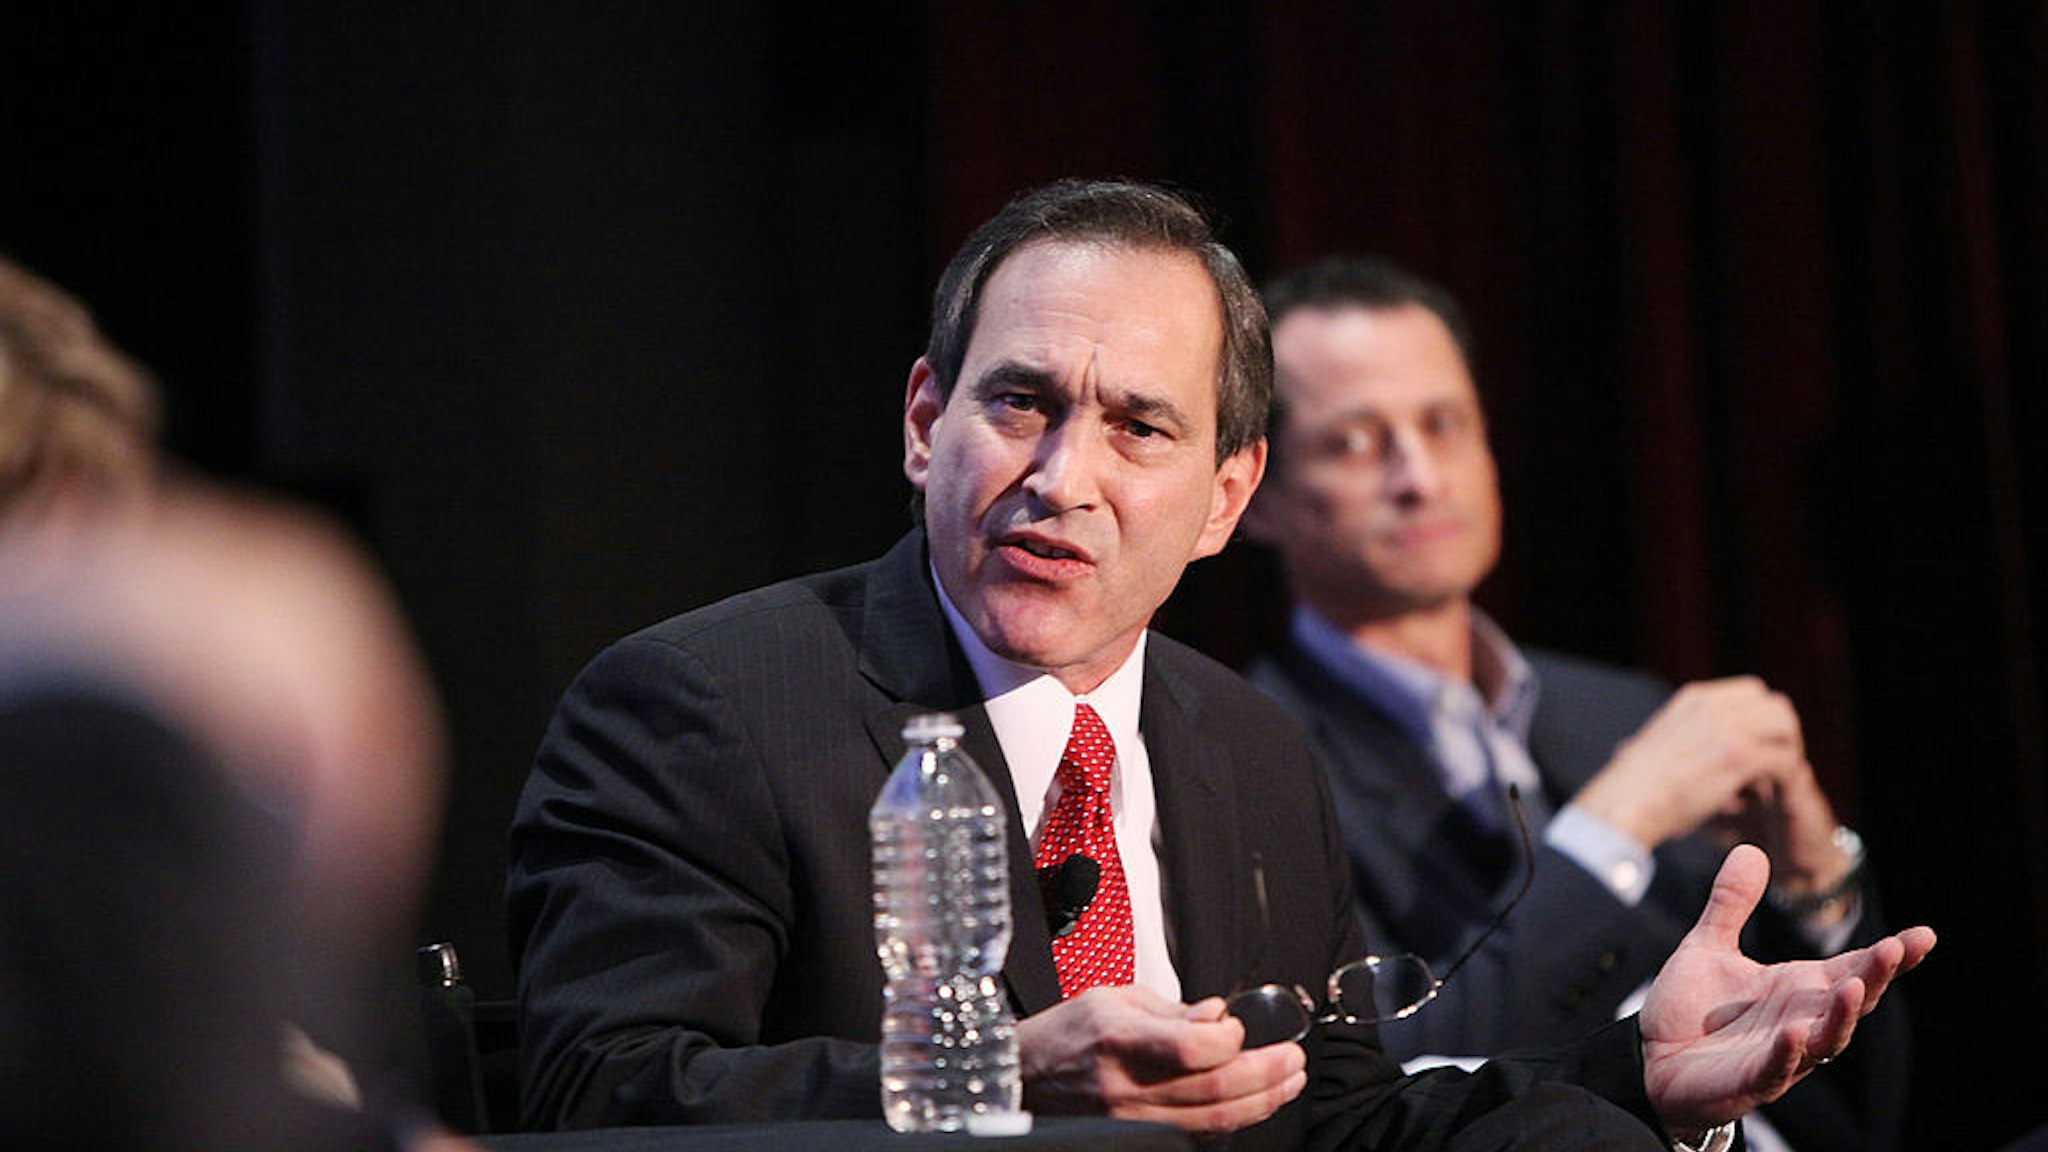 CNBC's Rick Santelli speaks at "Tea Party" a panel discussion at the 2010 New Yorker Festival at DGA Theater on October 2, 2010 in New York City.